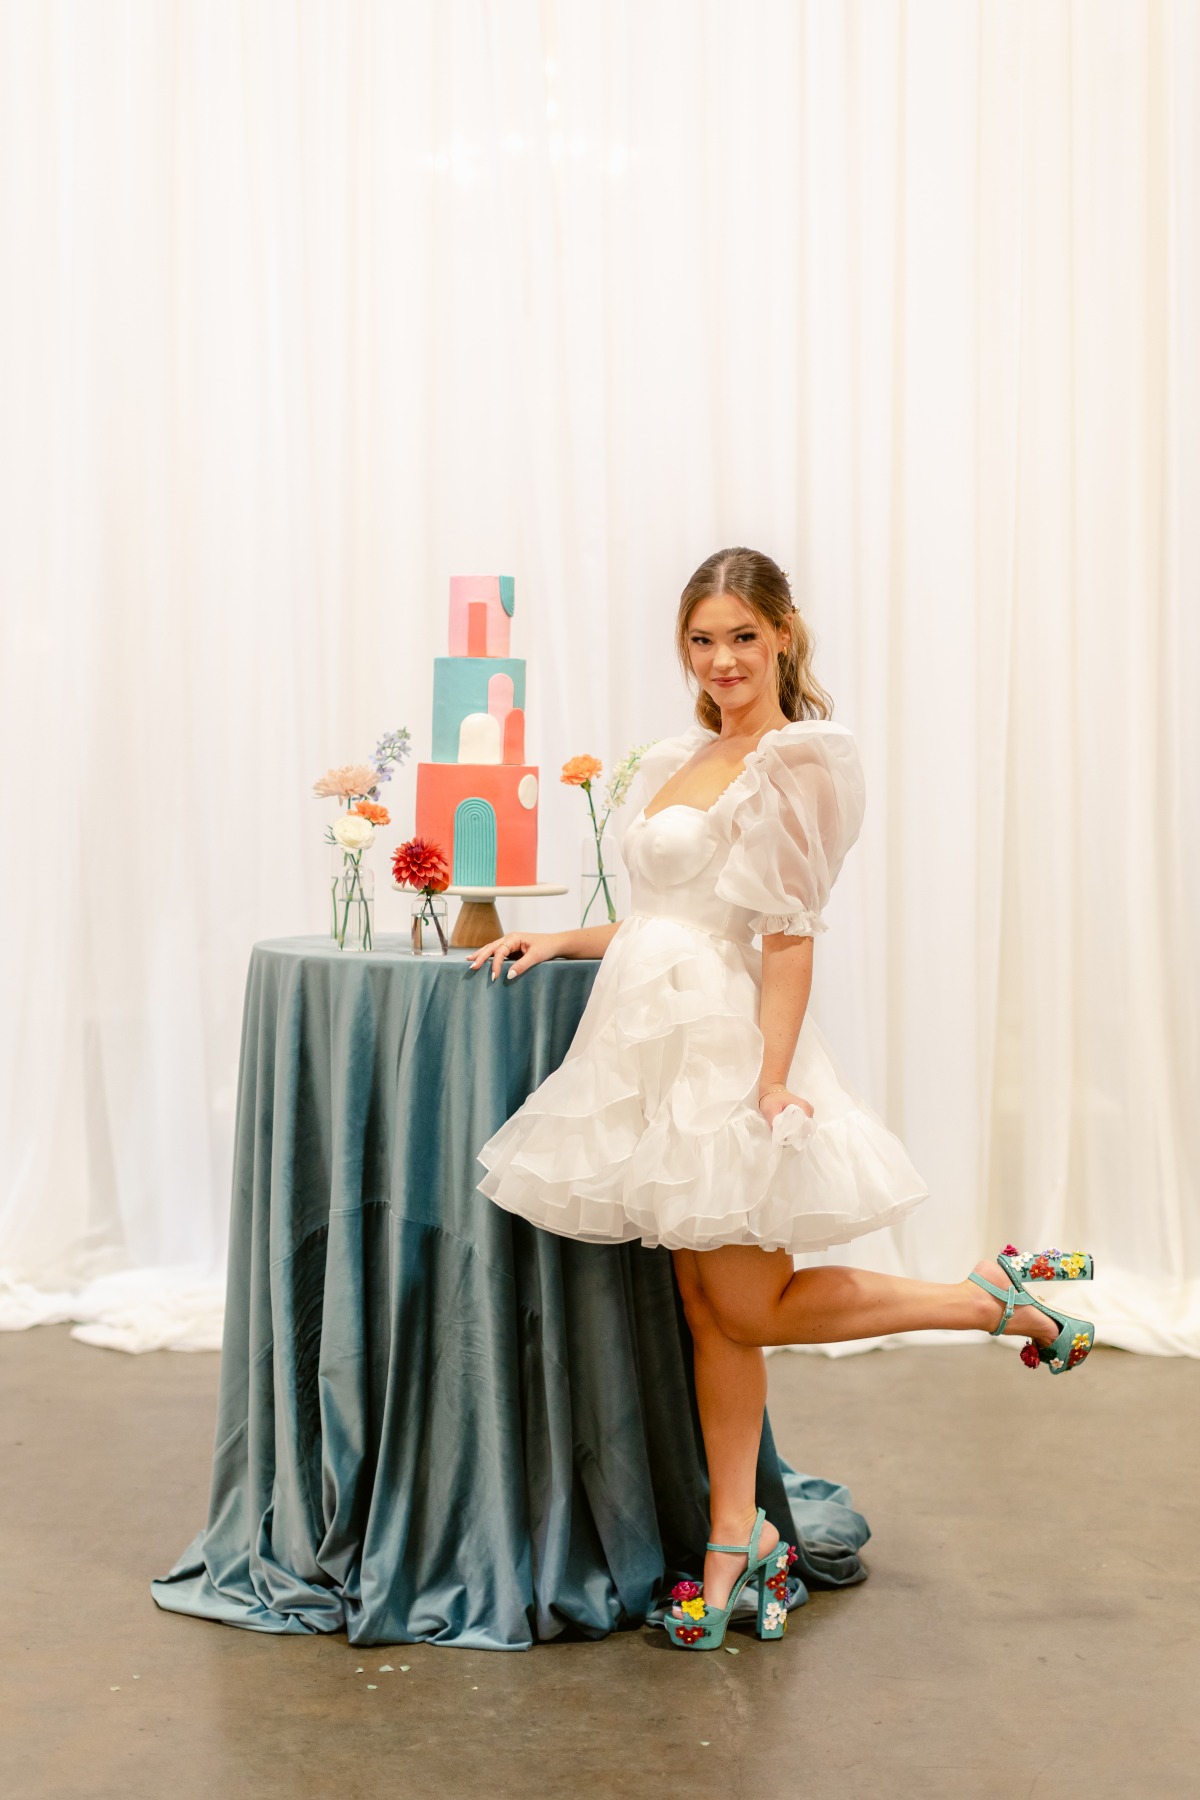 Bride with colorful wedding cake